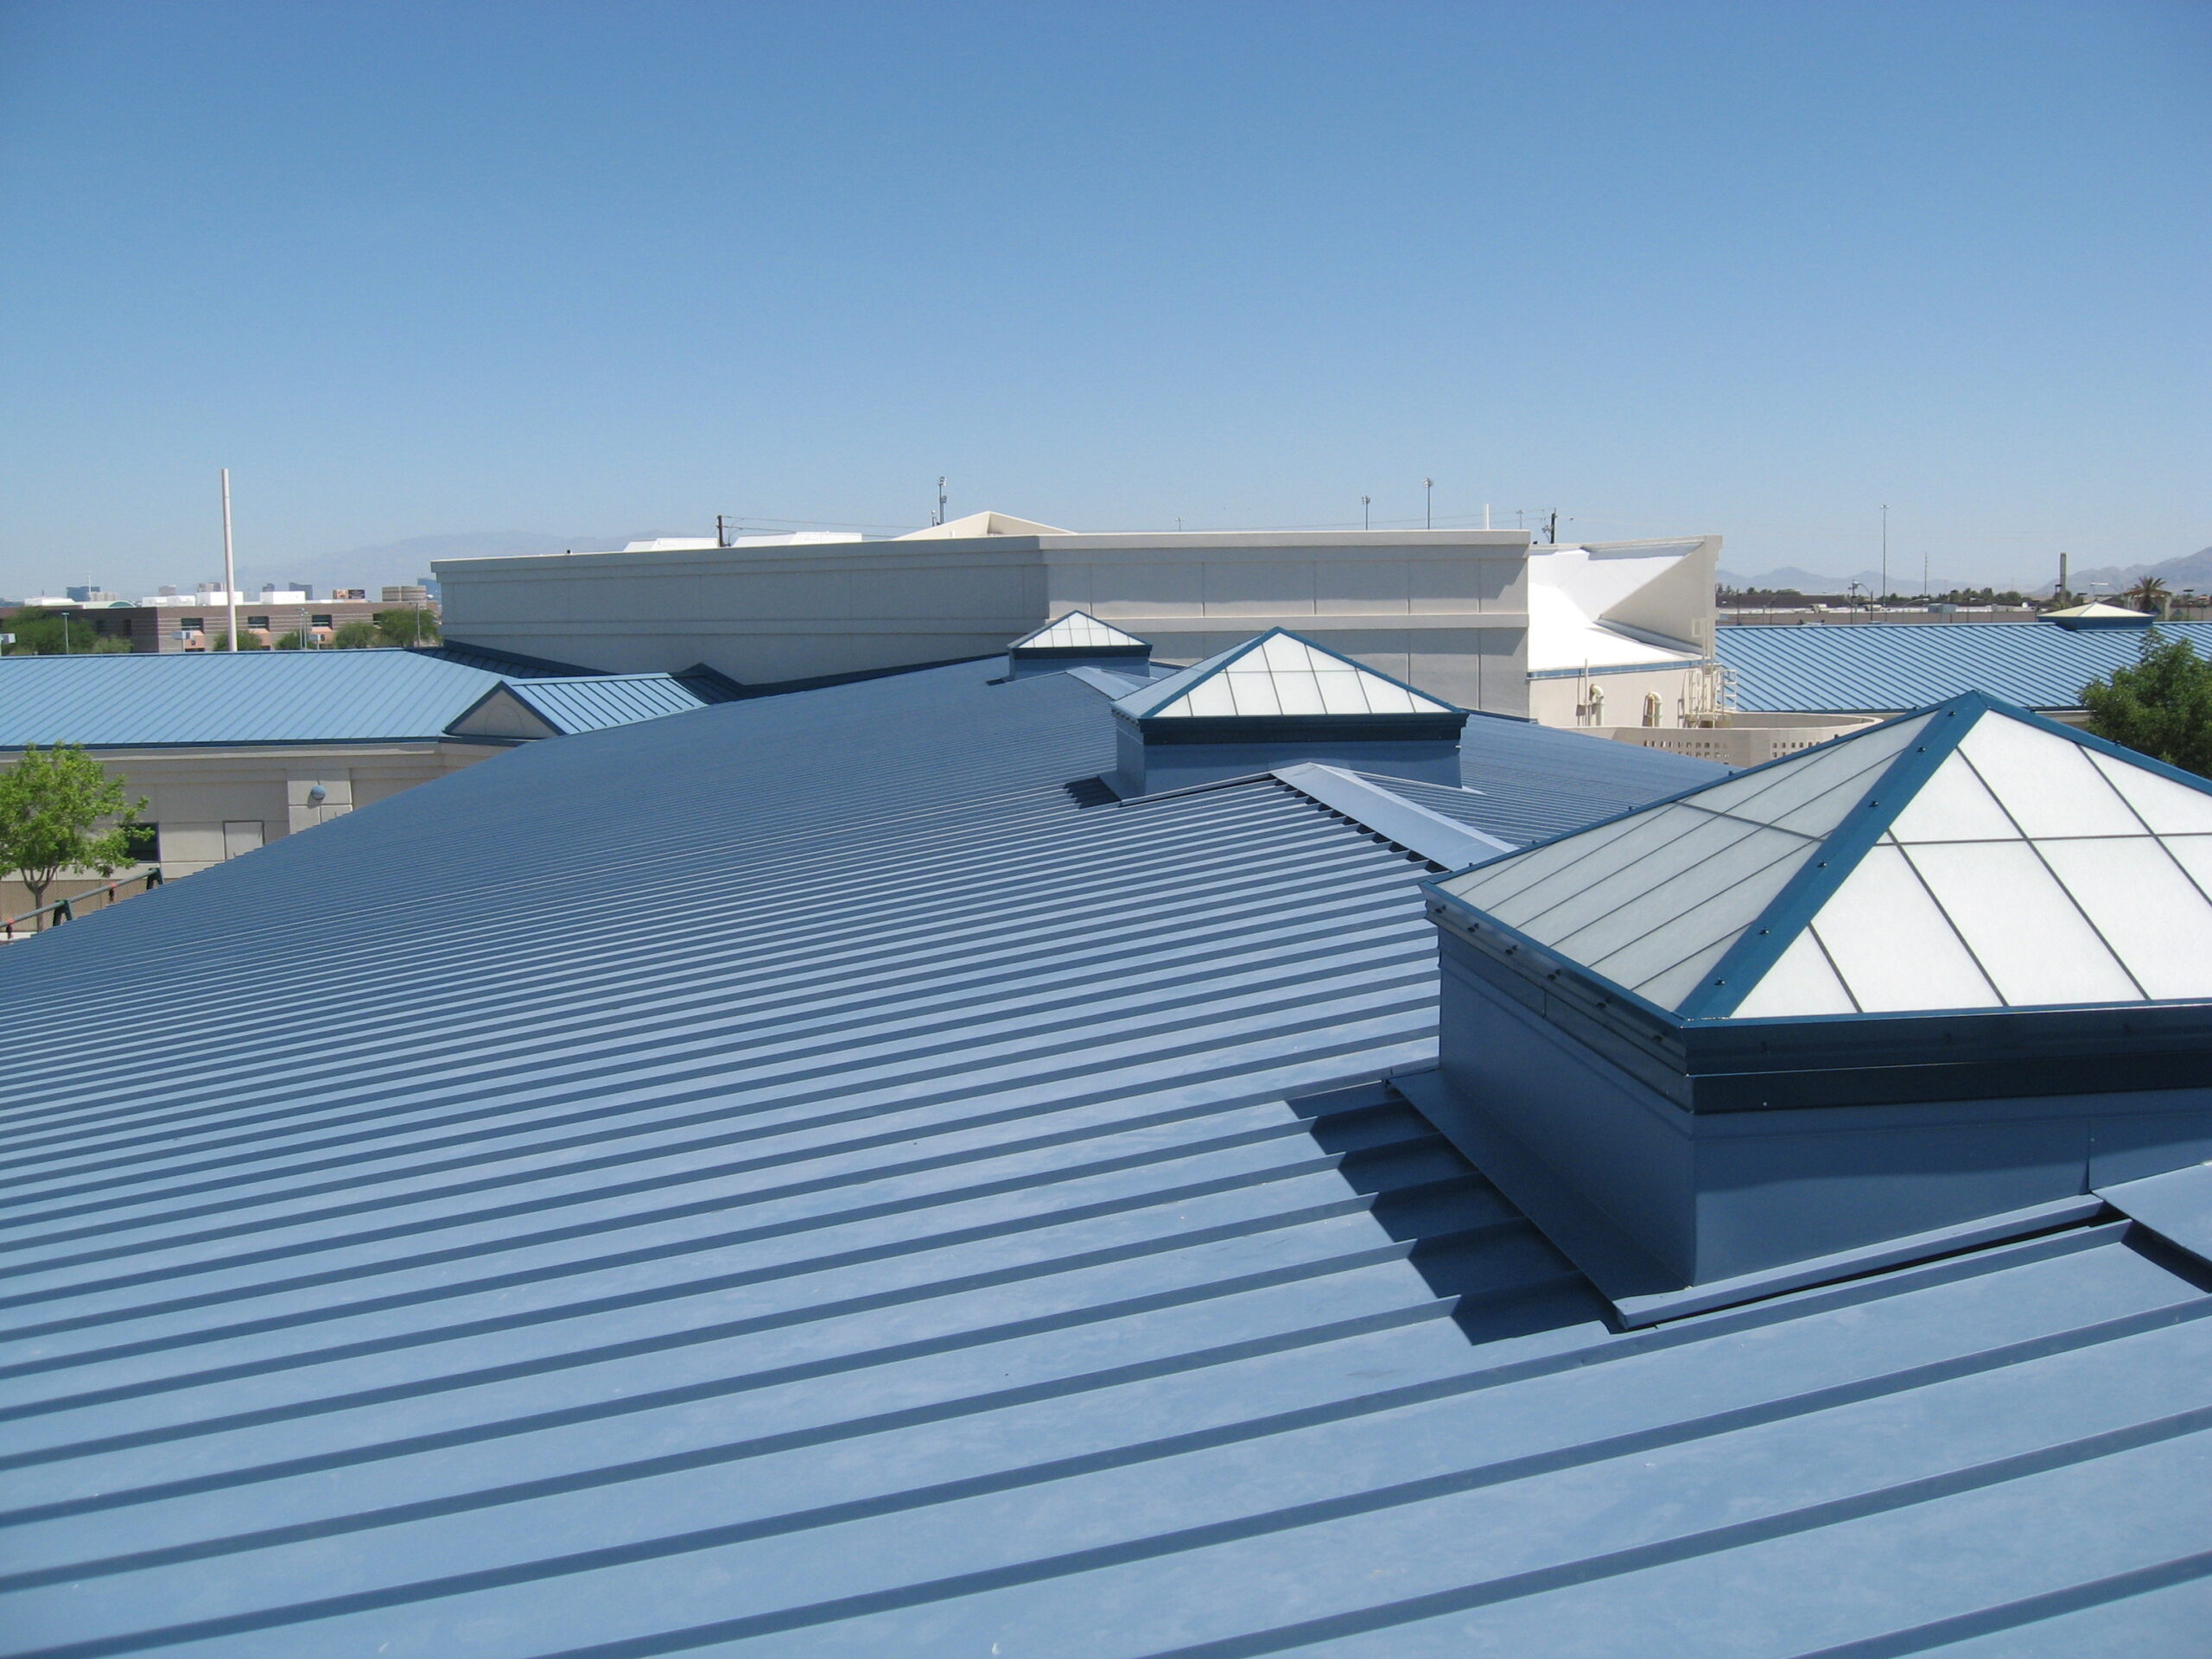 What Makes a Roof Energy-Efficient?